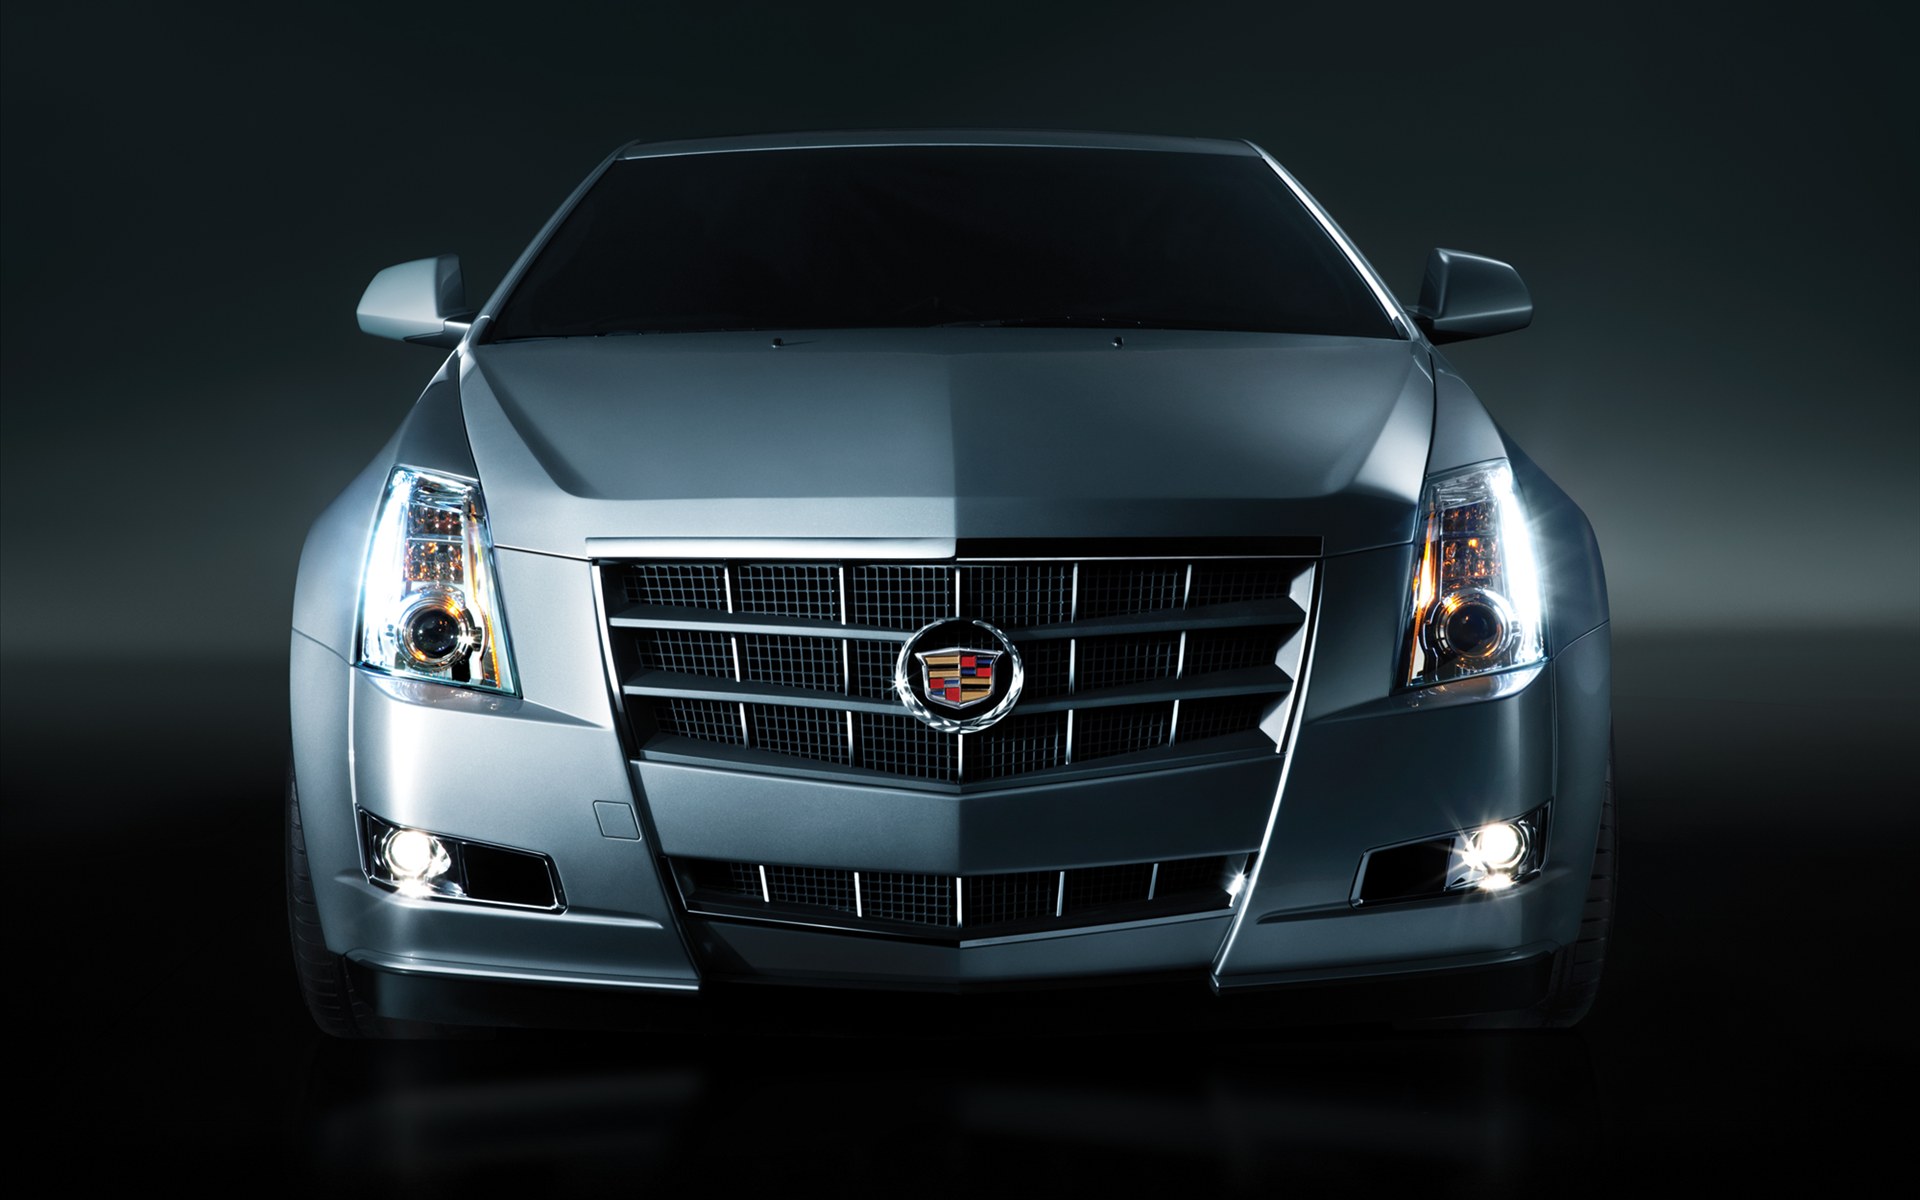 Cadillac CTS Coupe 2011 Wallpaper For Ipad